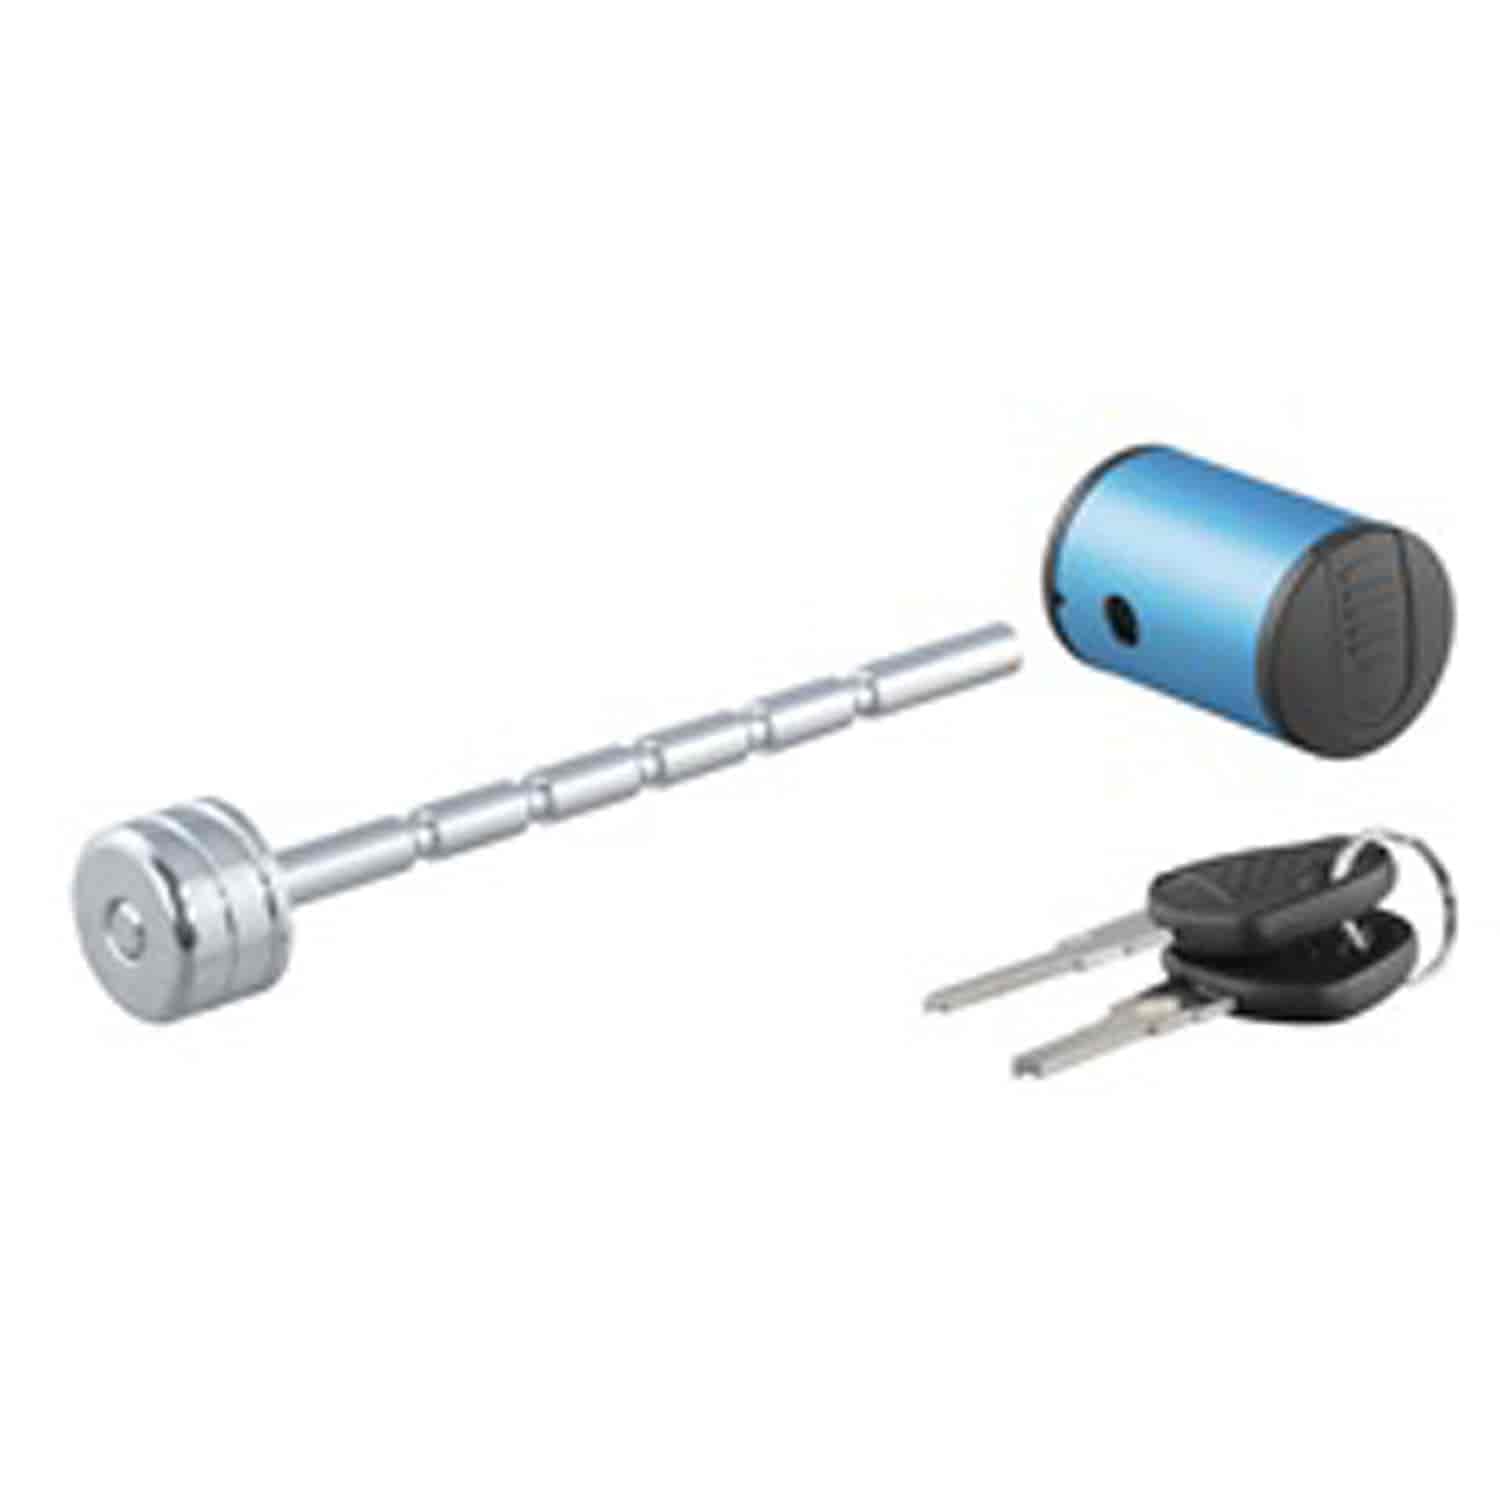 LOCK ADJUSTABLE COUPLER CHROME WITH BLUE ANODIZED HEAD